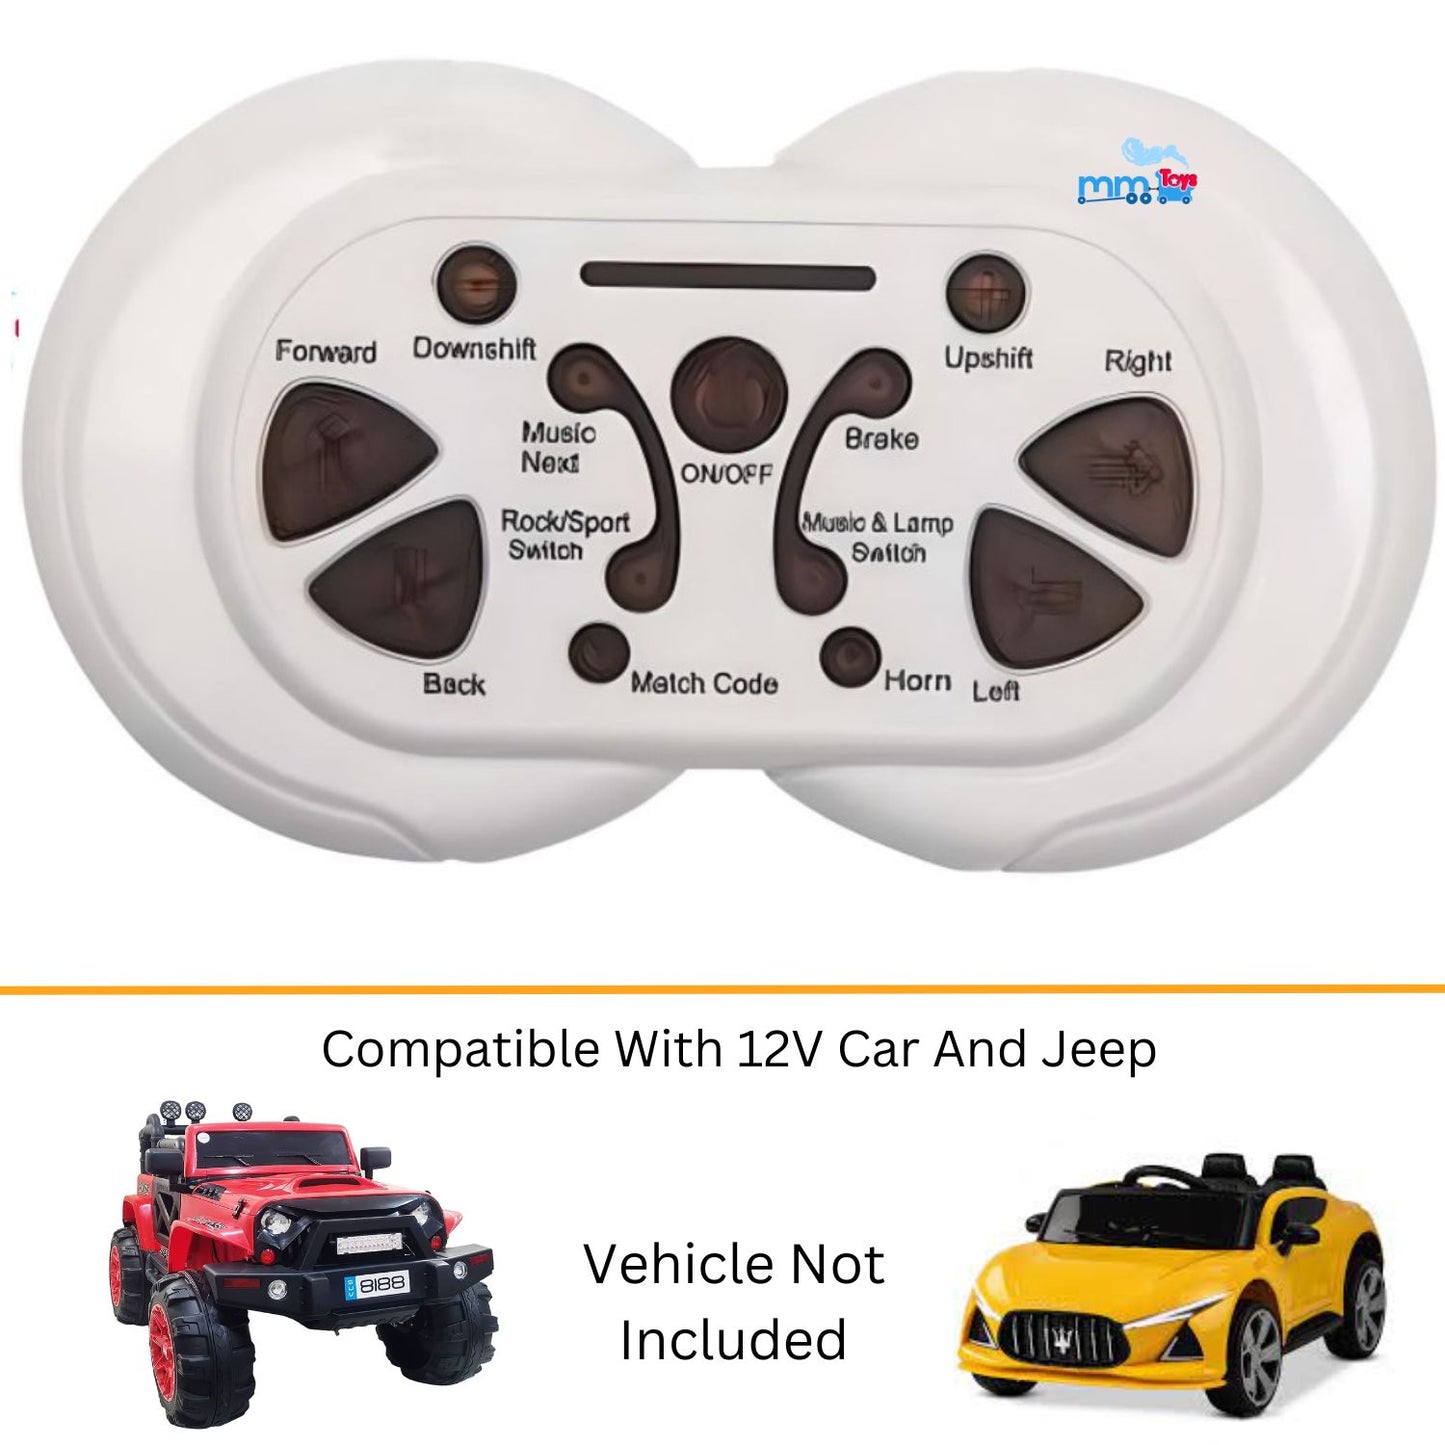 MM TOYS Multi-Functional Remote Only For Kids 12V Ride On Electric Car/Jeep  - Compatible  With Model JR-1816RXS-12V, JR1807 and HY-RX-2G4 Controller - White